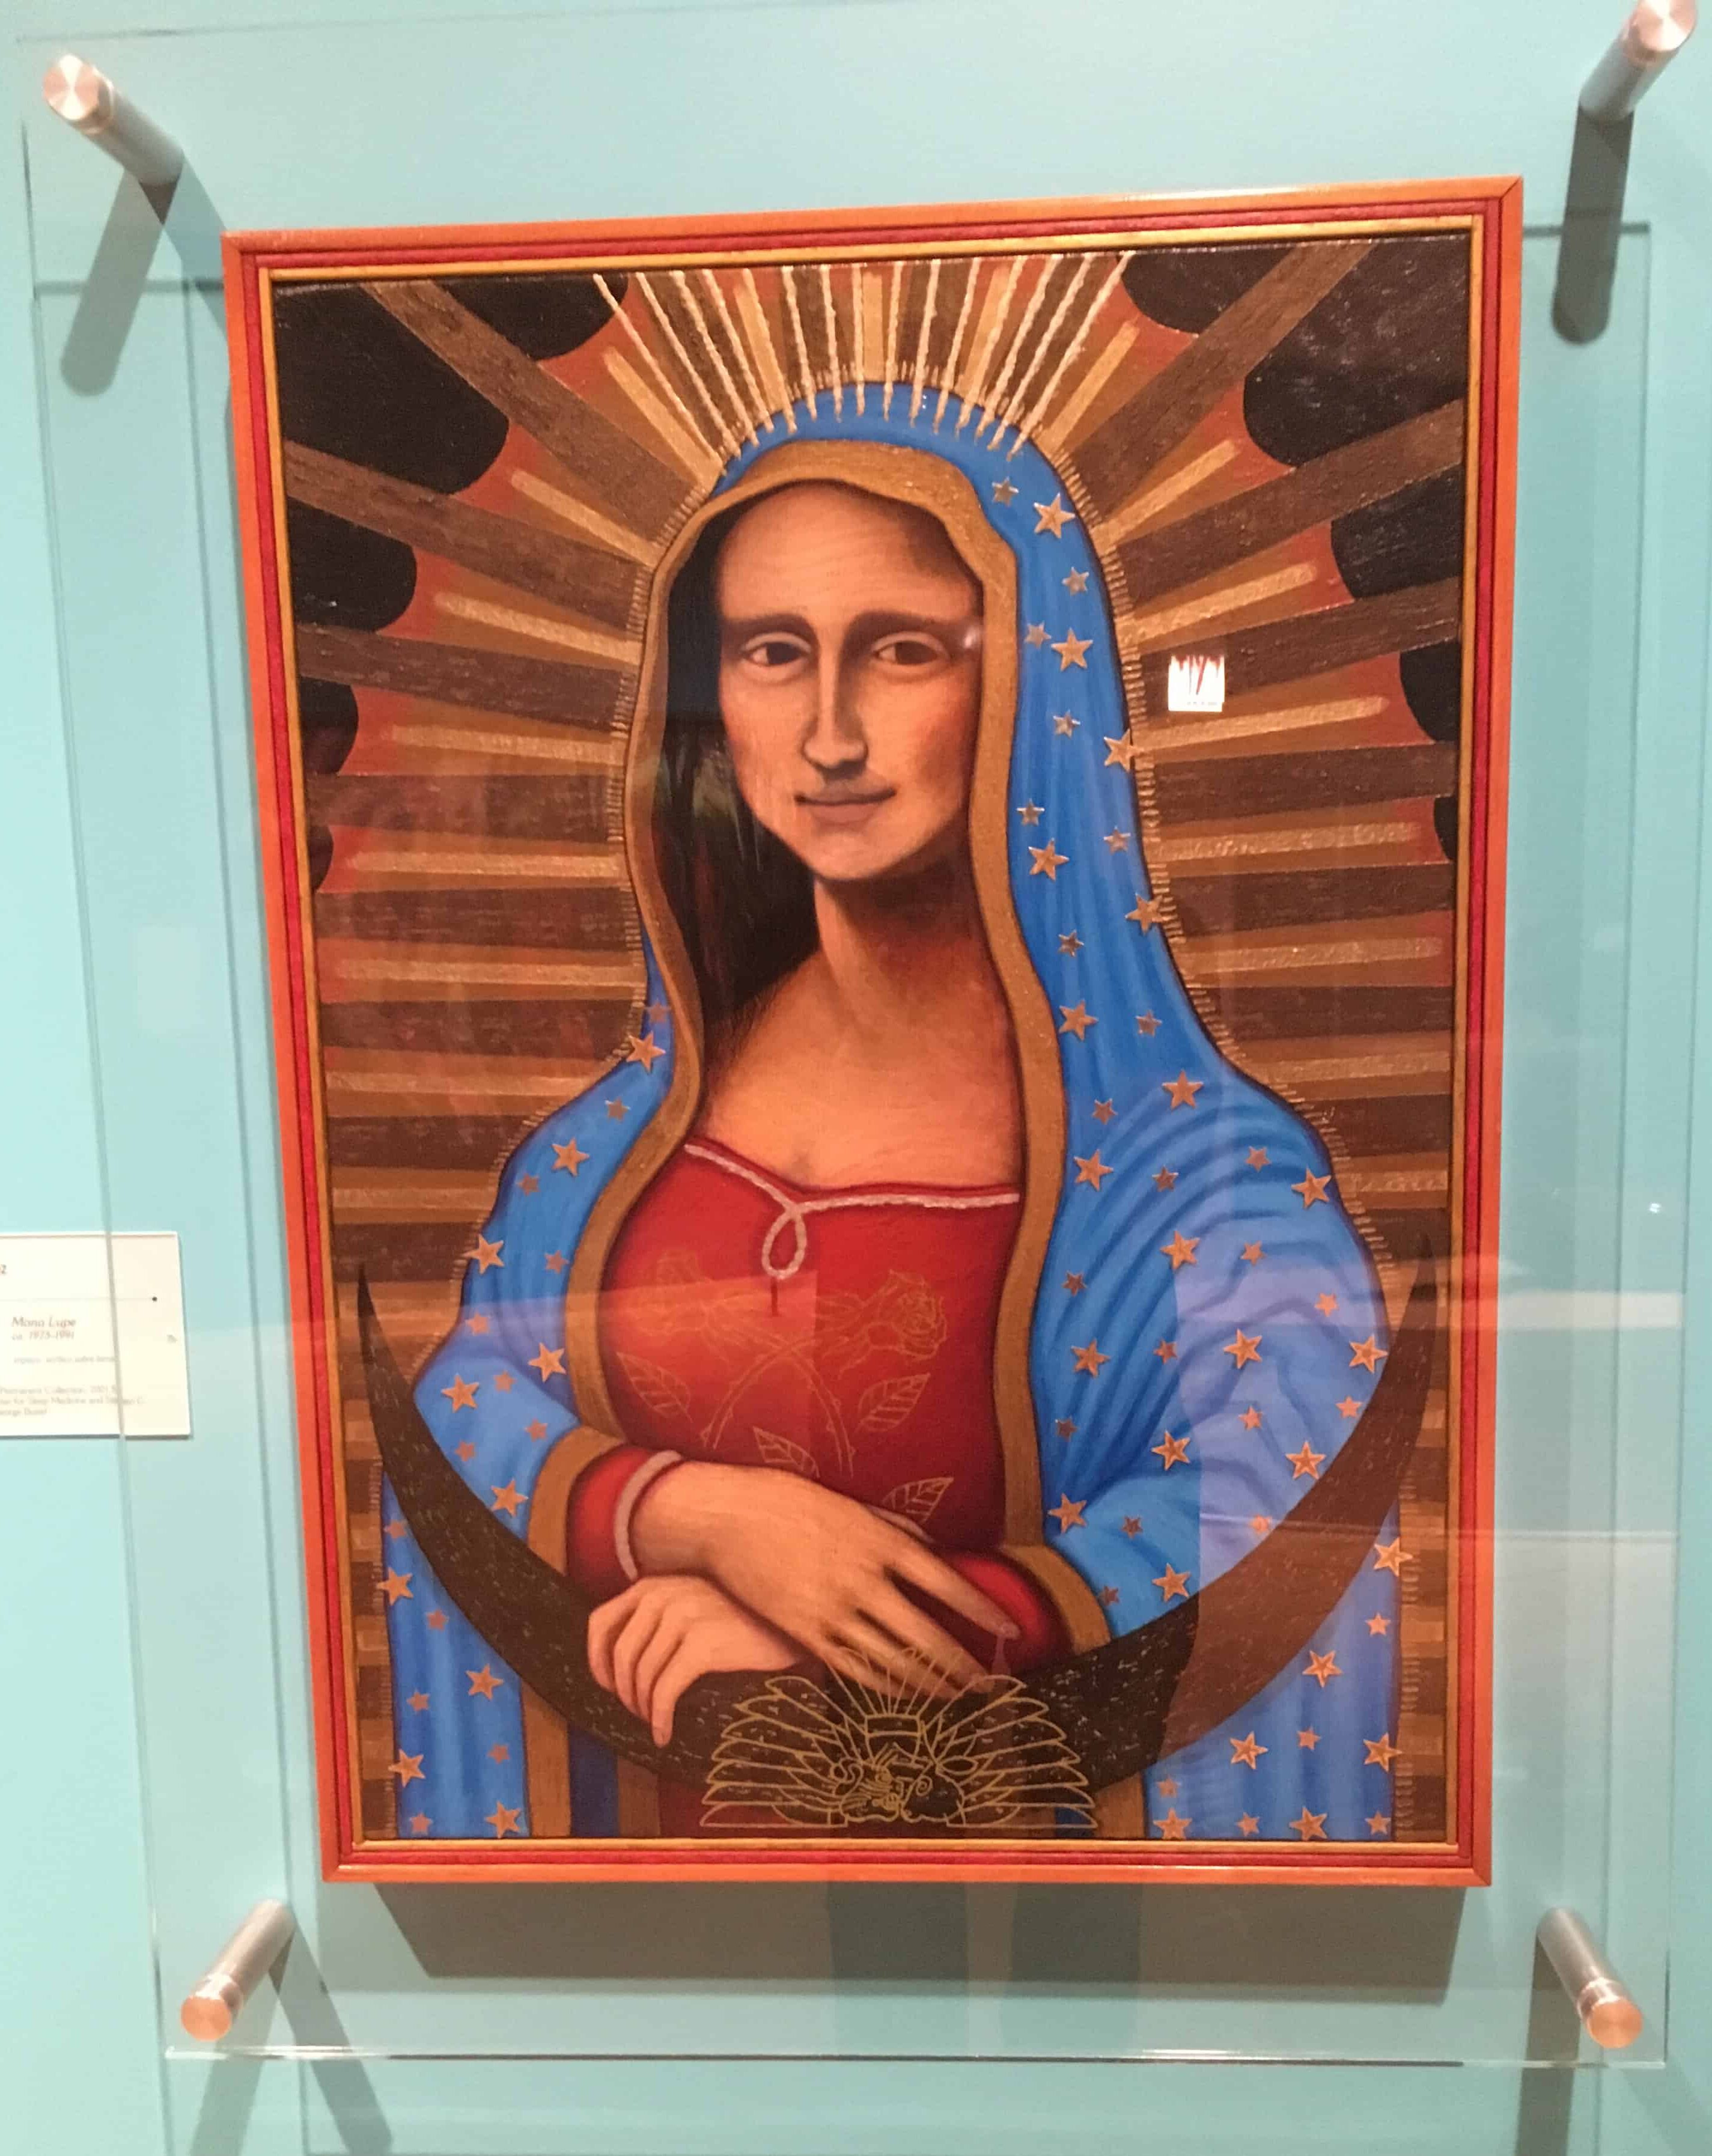 Mona Lupe by César Augusto Martínez at National Museum of Mexican Art in Pilsen, Chicago, Illinois